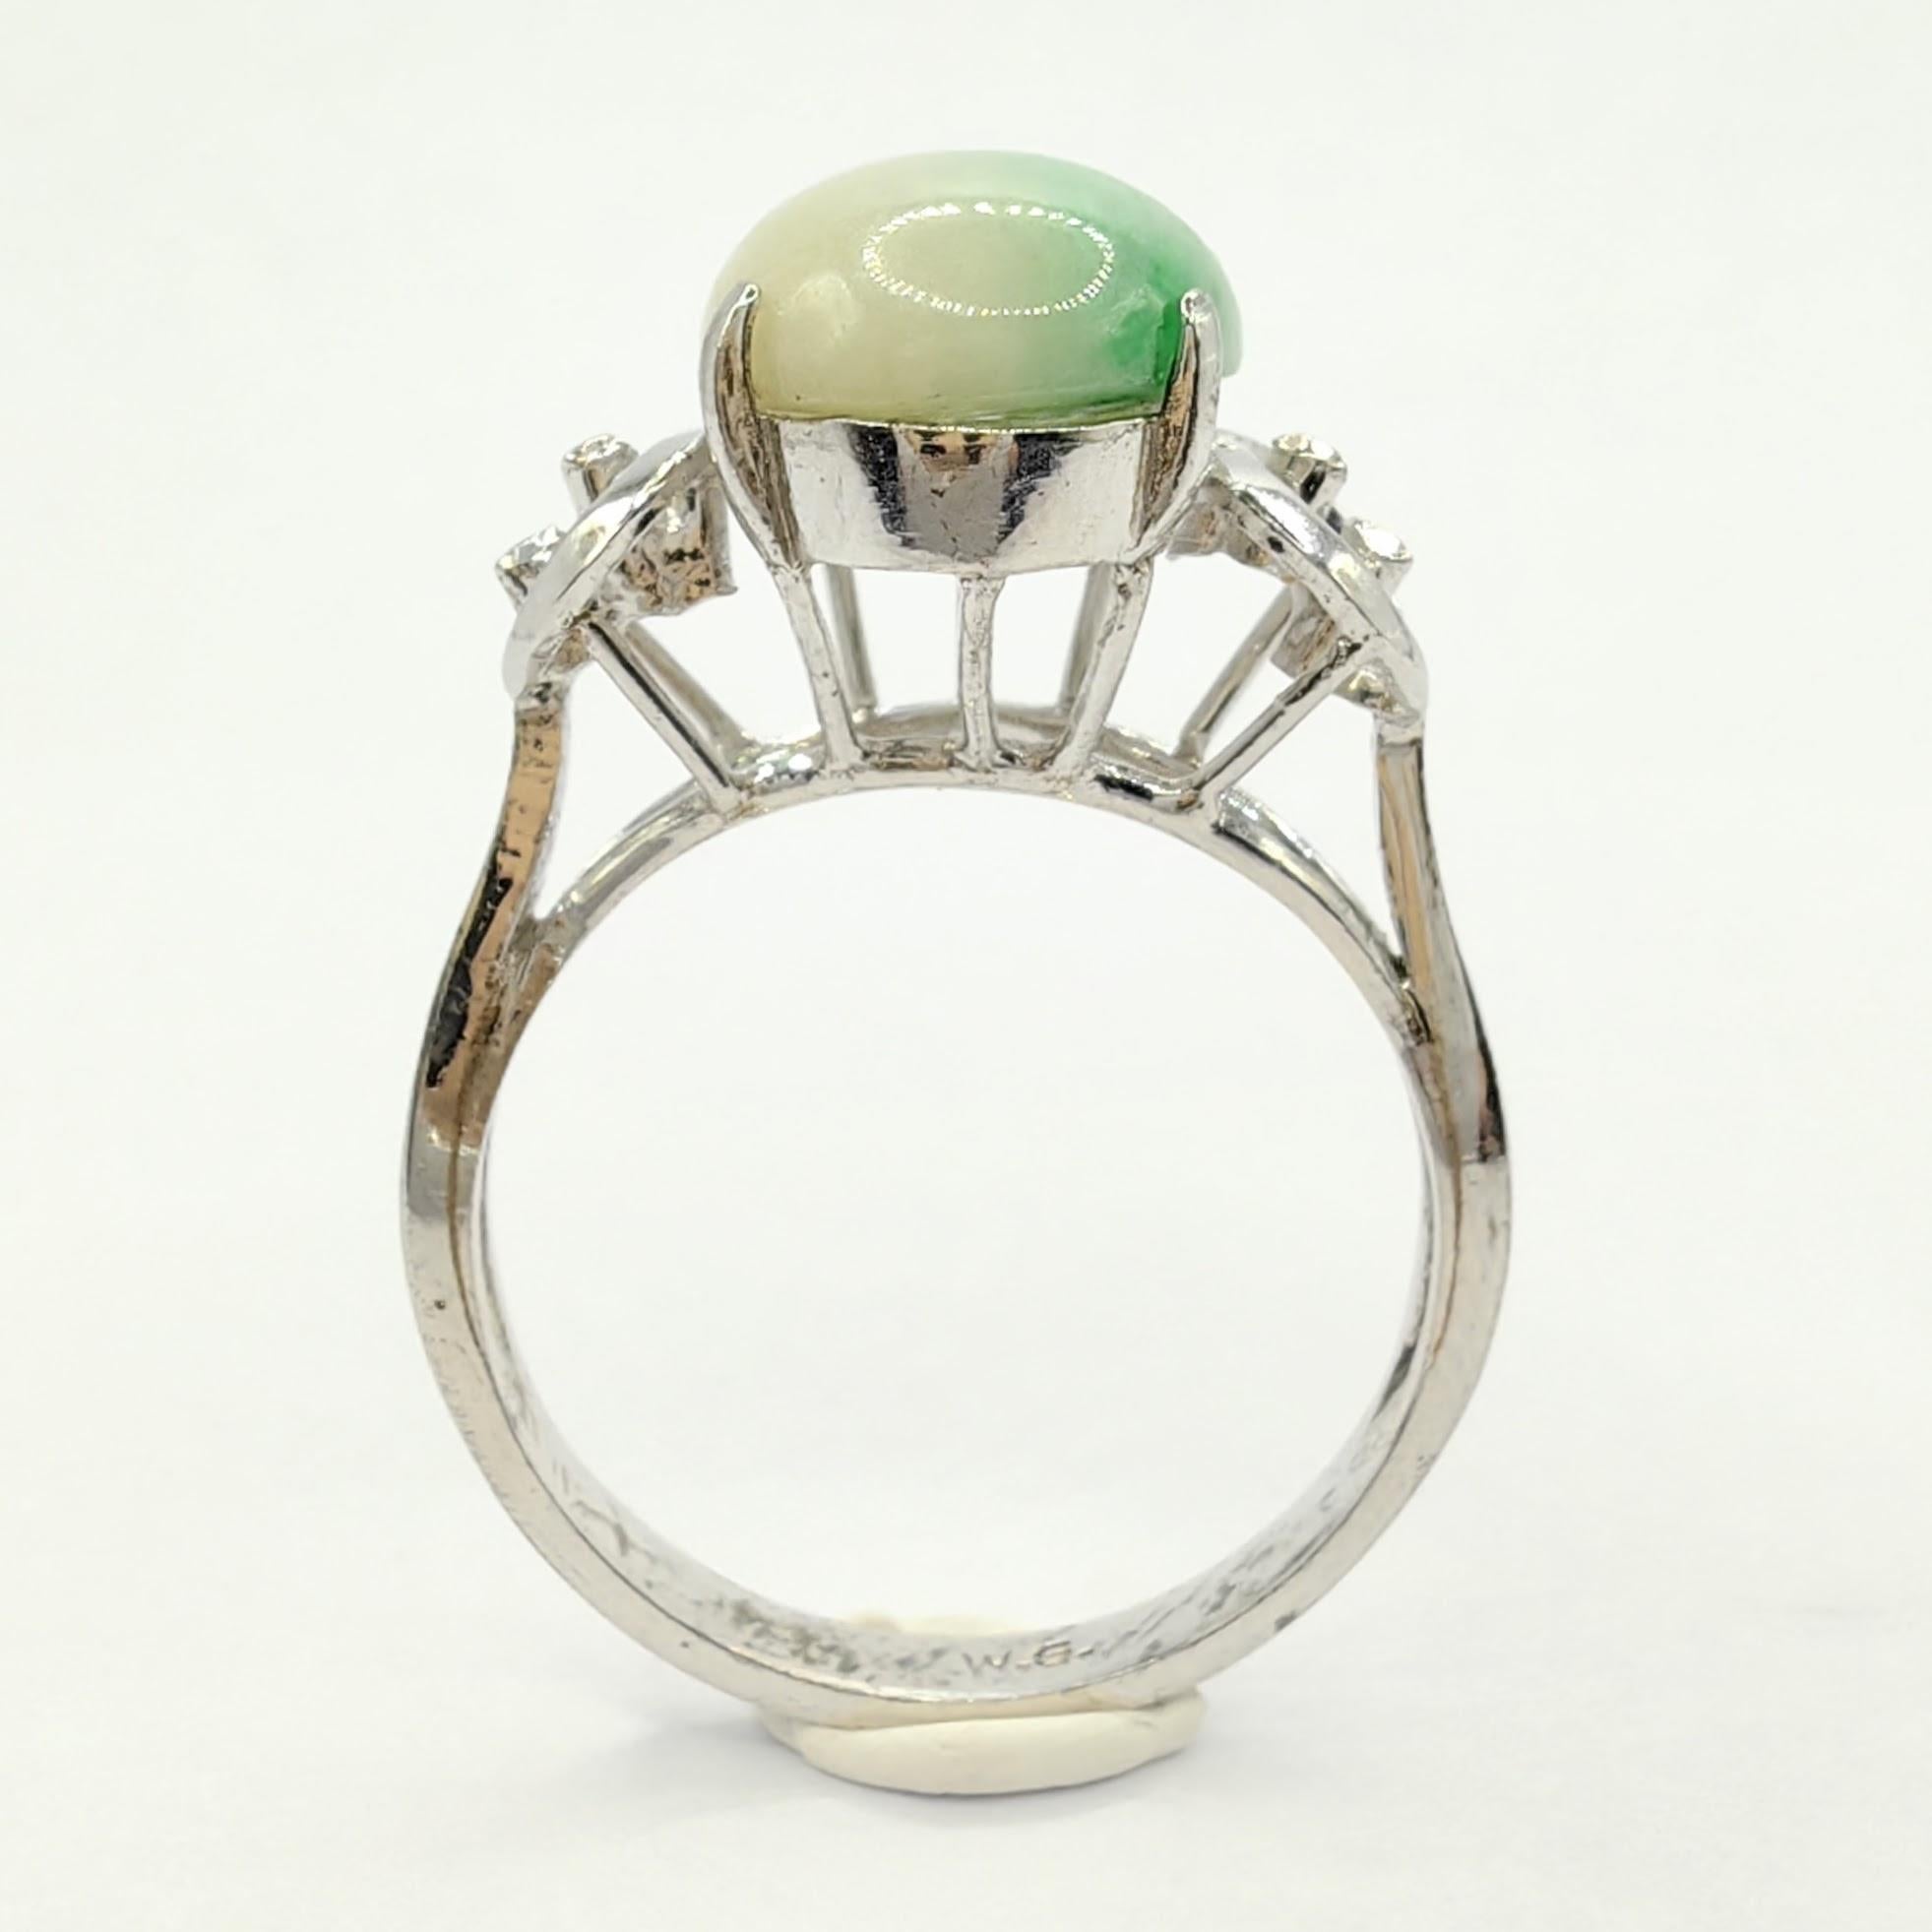 Introducing our exquisite Vintage Solitaire White & Green Jade Ring in White Gold, a captivating piece that seamlessly combines the elegance of white gold with the allure of a stunning cabochon cut jade gemstone. This unique ring showcases a